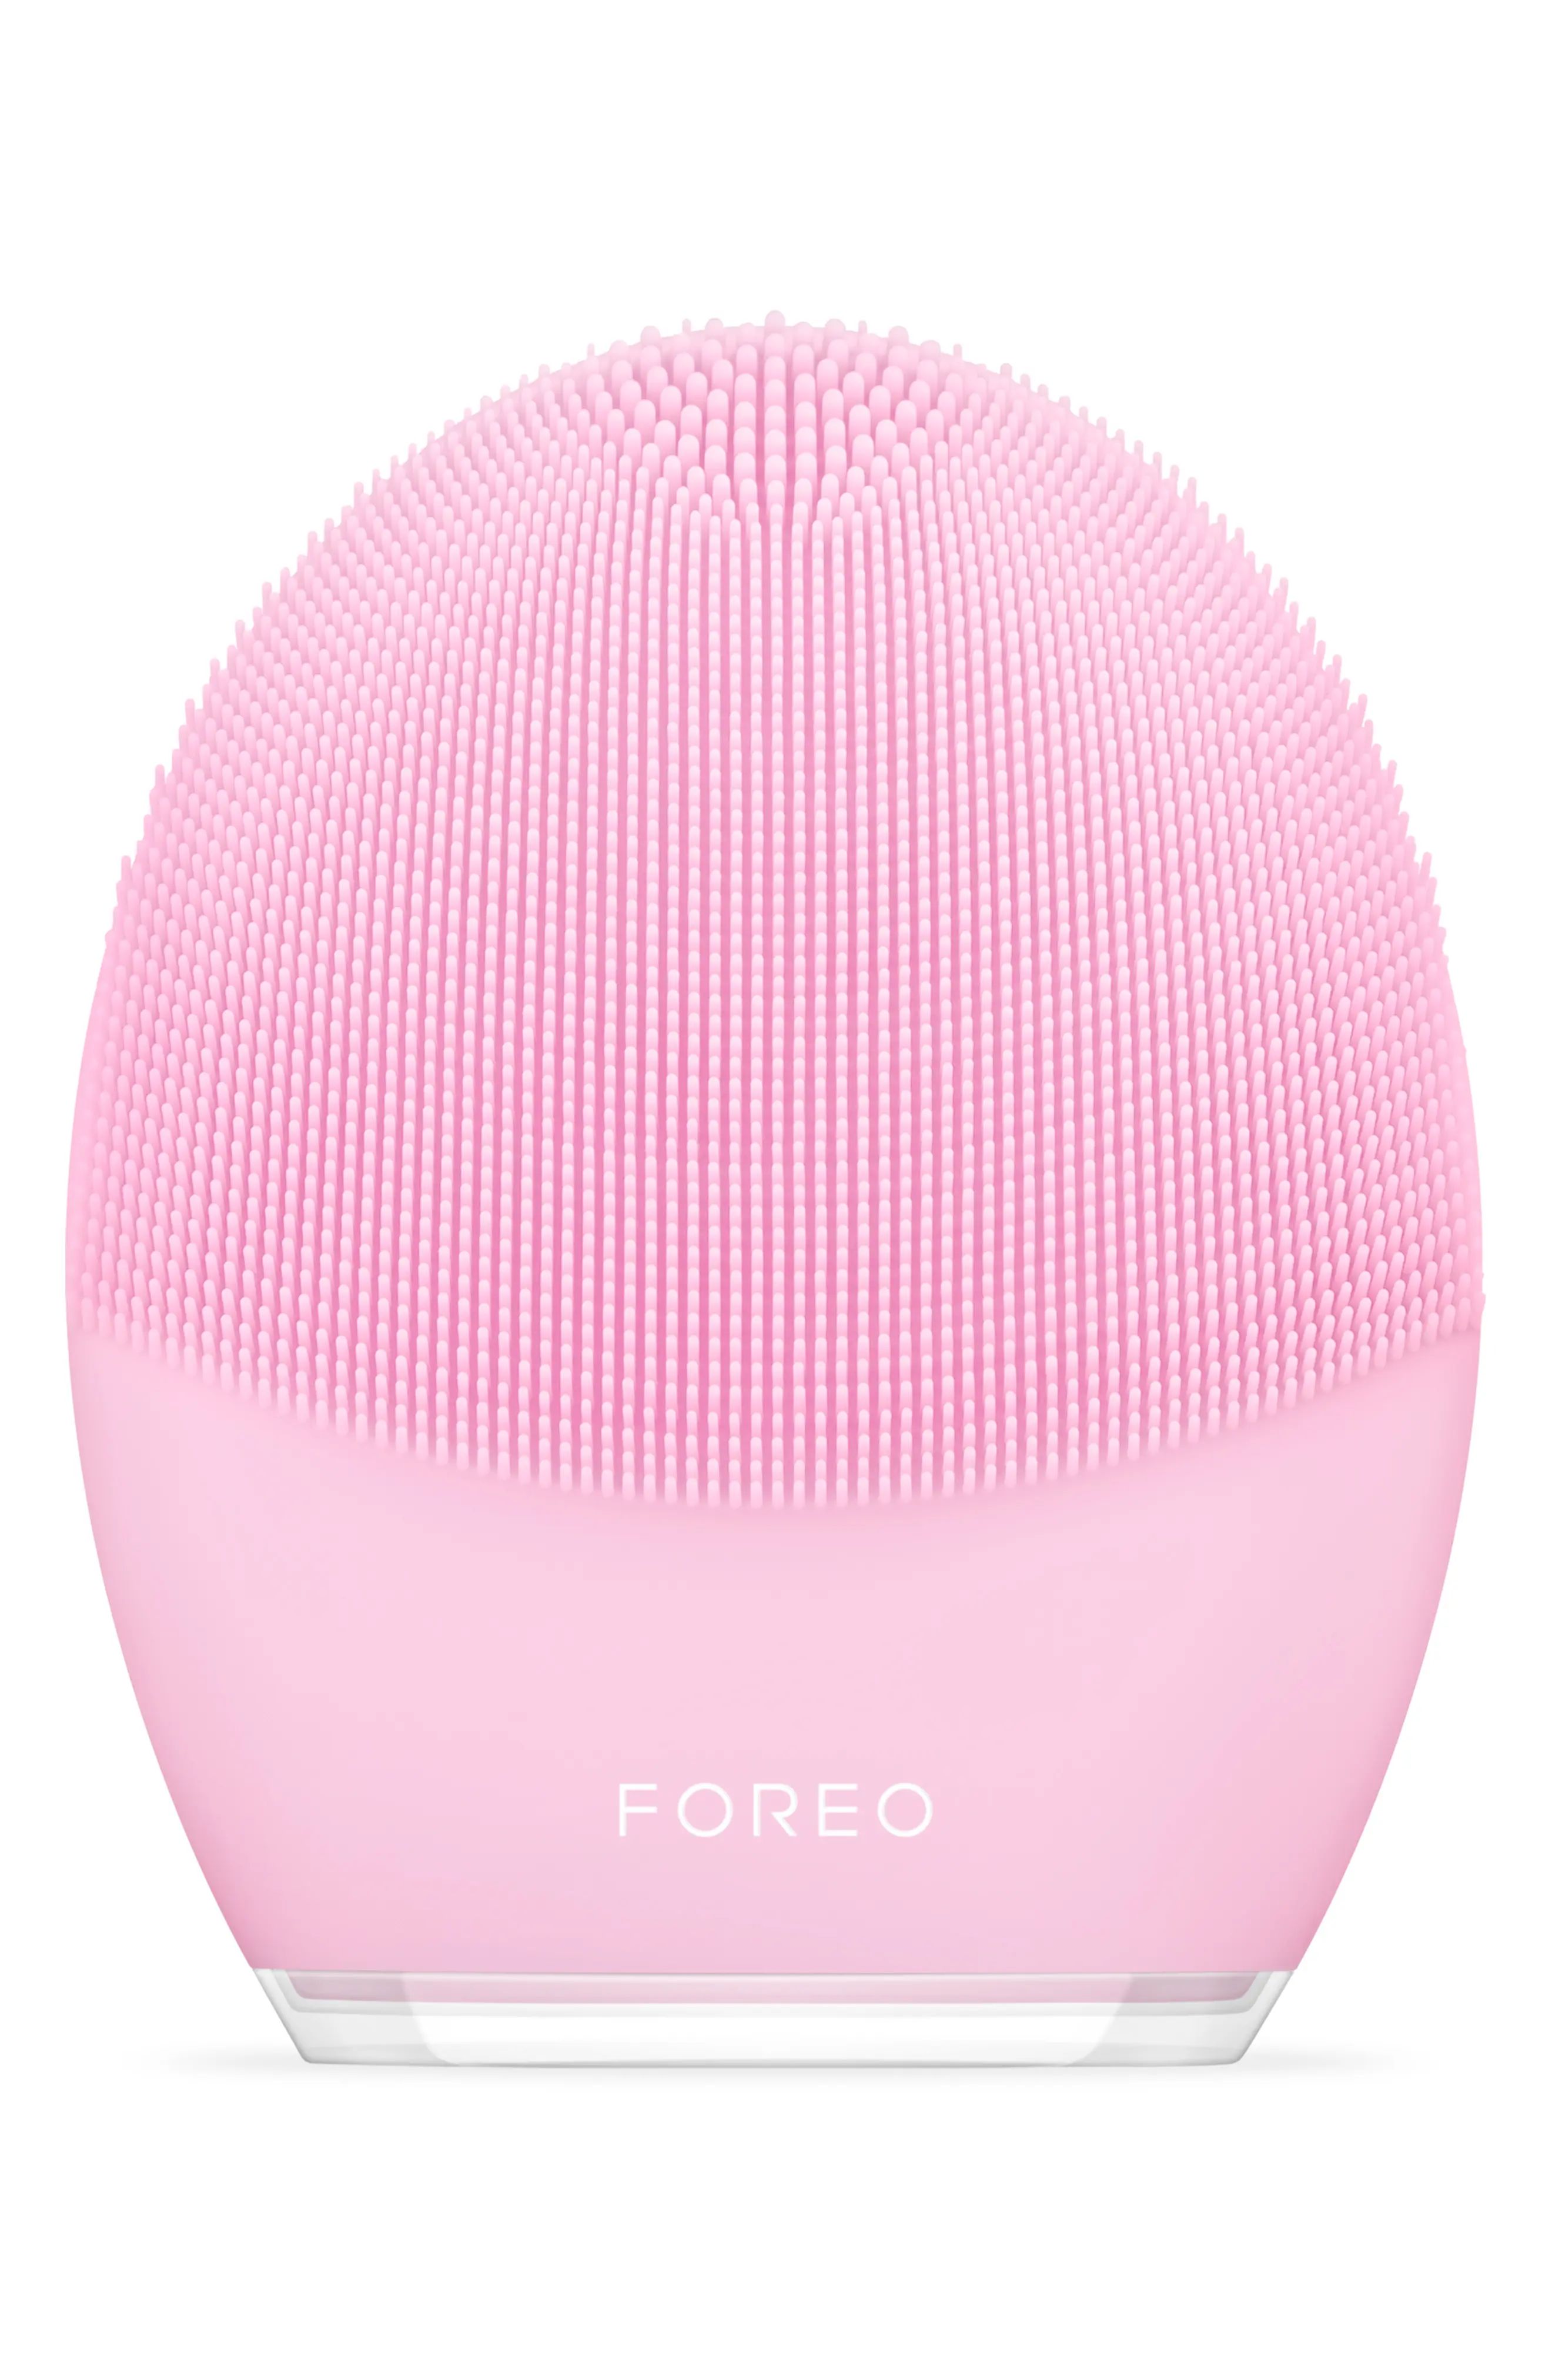 FOREO LUNA(TM) 3 Normal Skin Facial Cleansing & Firming Massage Device at Nordstrom | Nordstrom